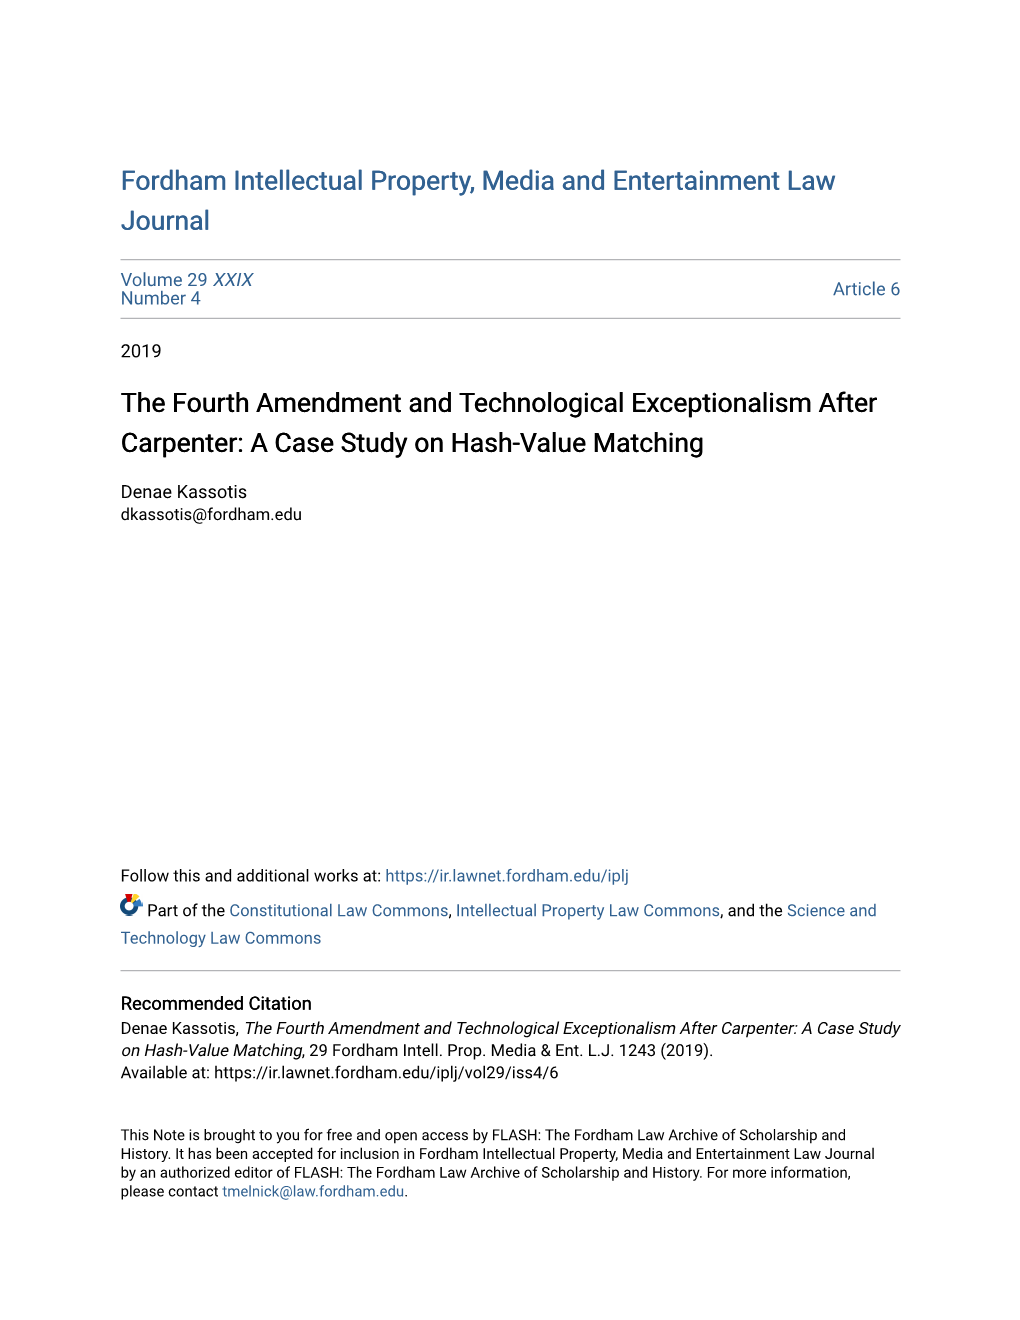 The Fourth Amendment and Technological Exceptionalism After Carpenter: a Case Study on Hash-Value Matching